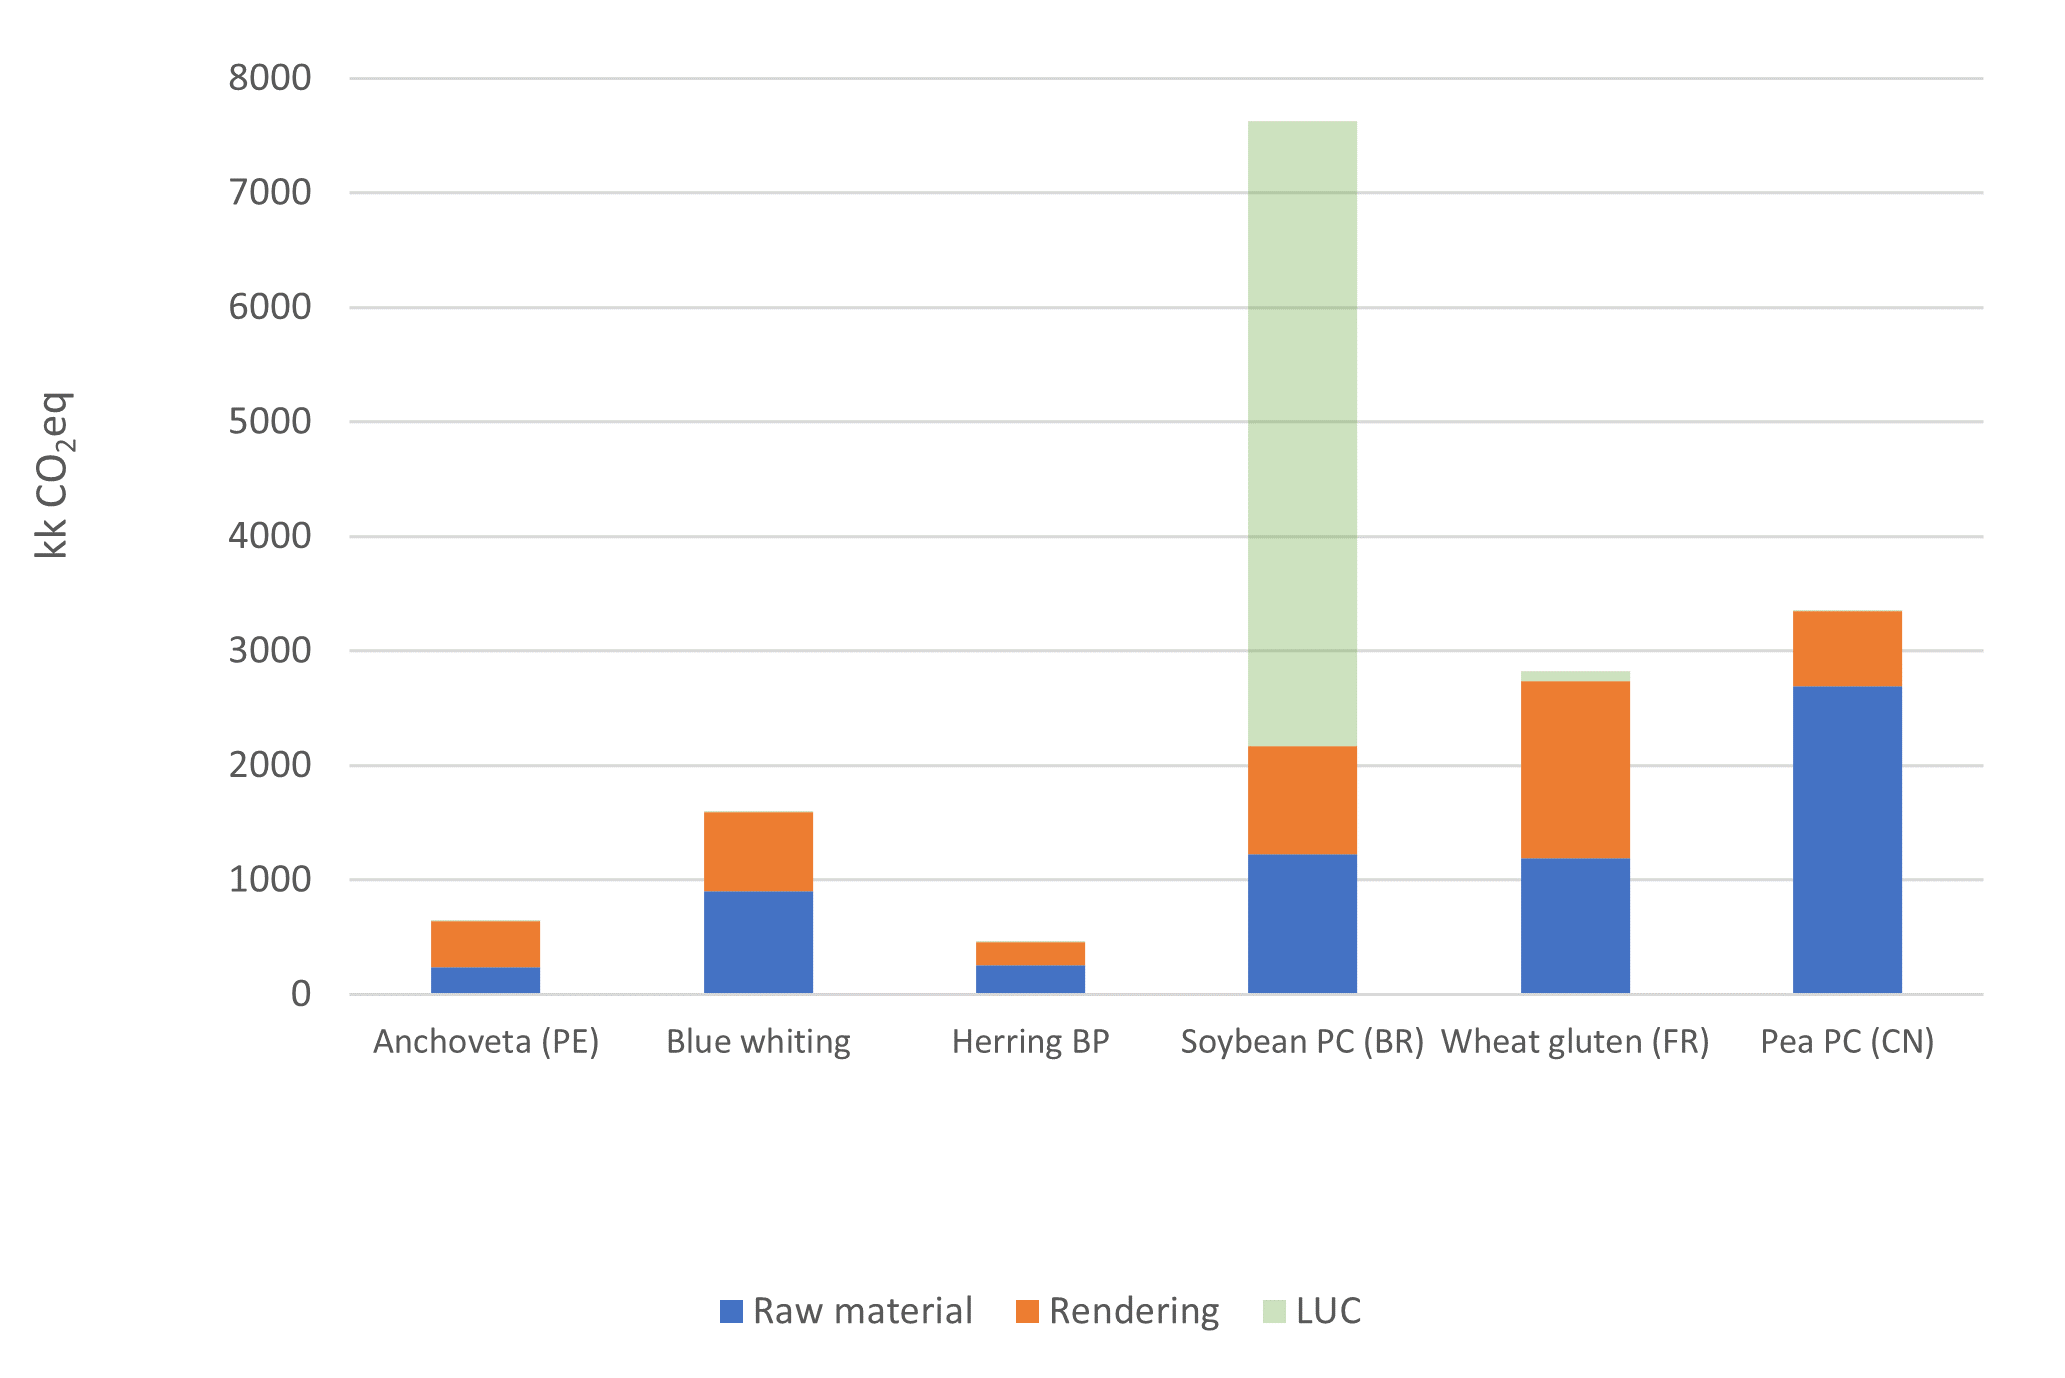 Chart of carbon footprint for different feed ingredients showing soyabean as highest and herring lowest.